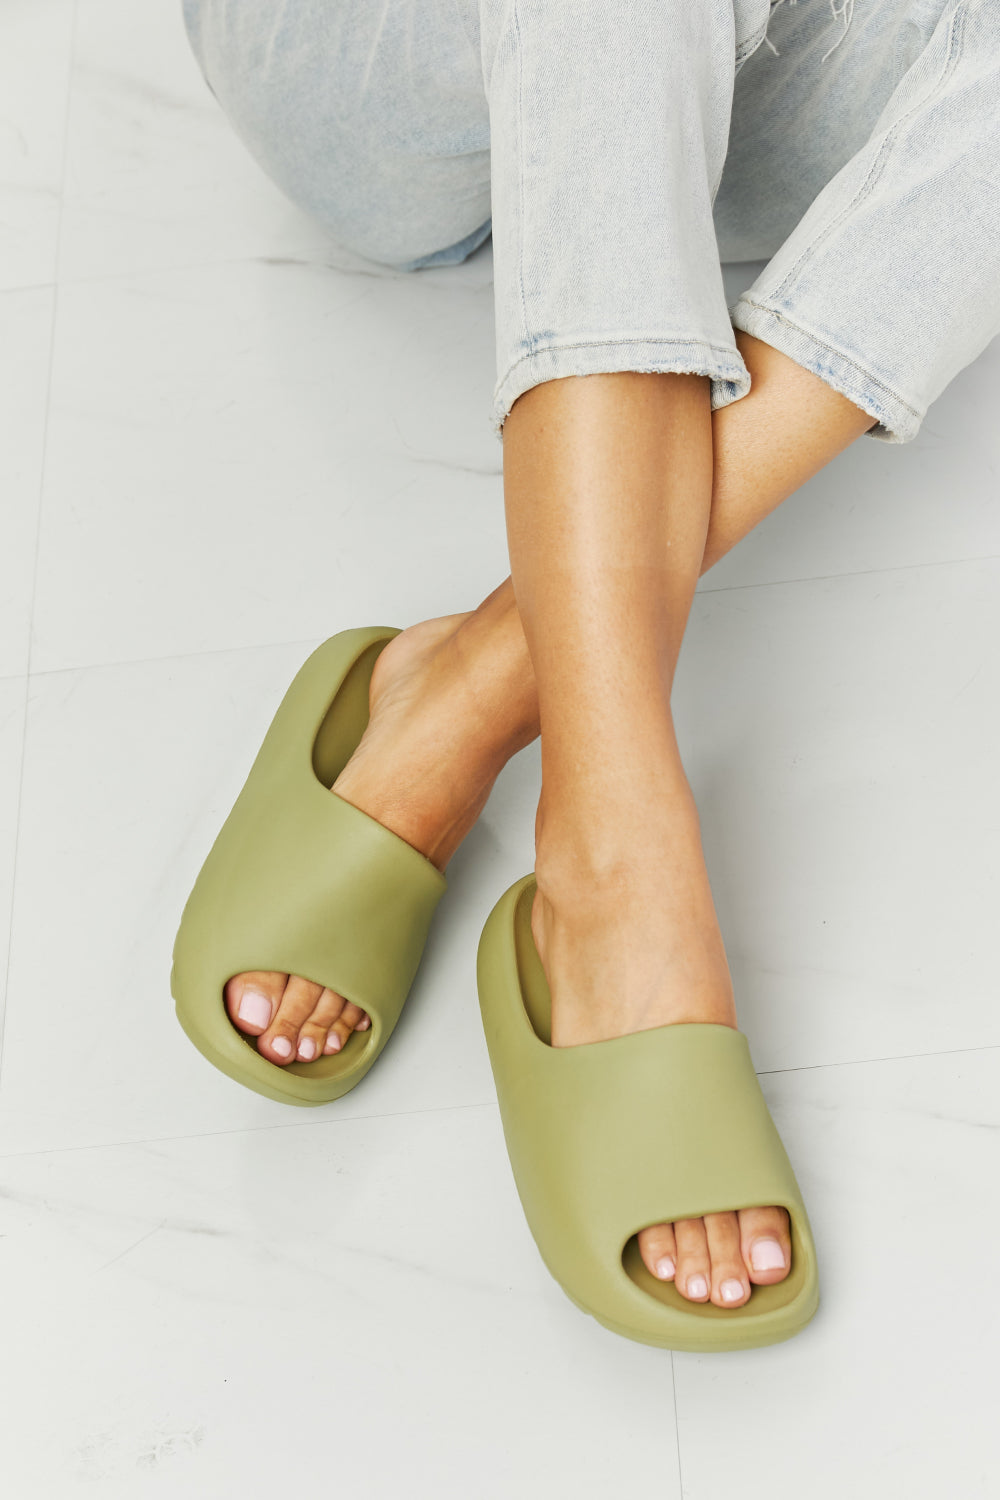 NOOK JOI In My Comfort Zone Slides in Green - BEAUTY COSMOTICS SHOP